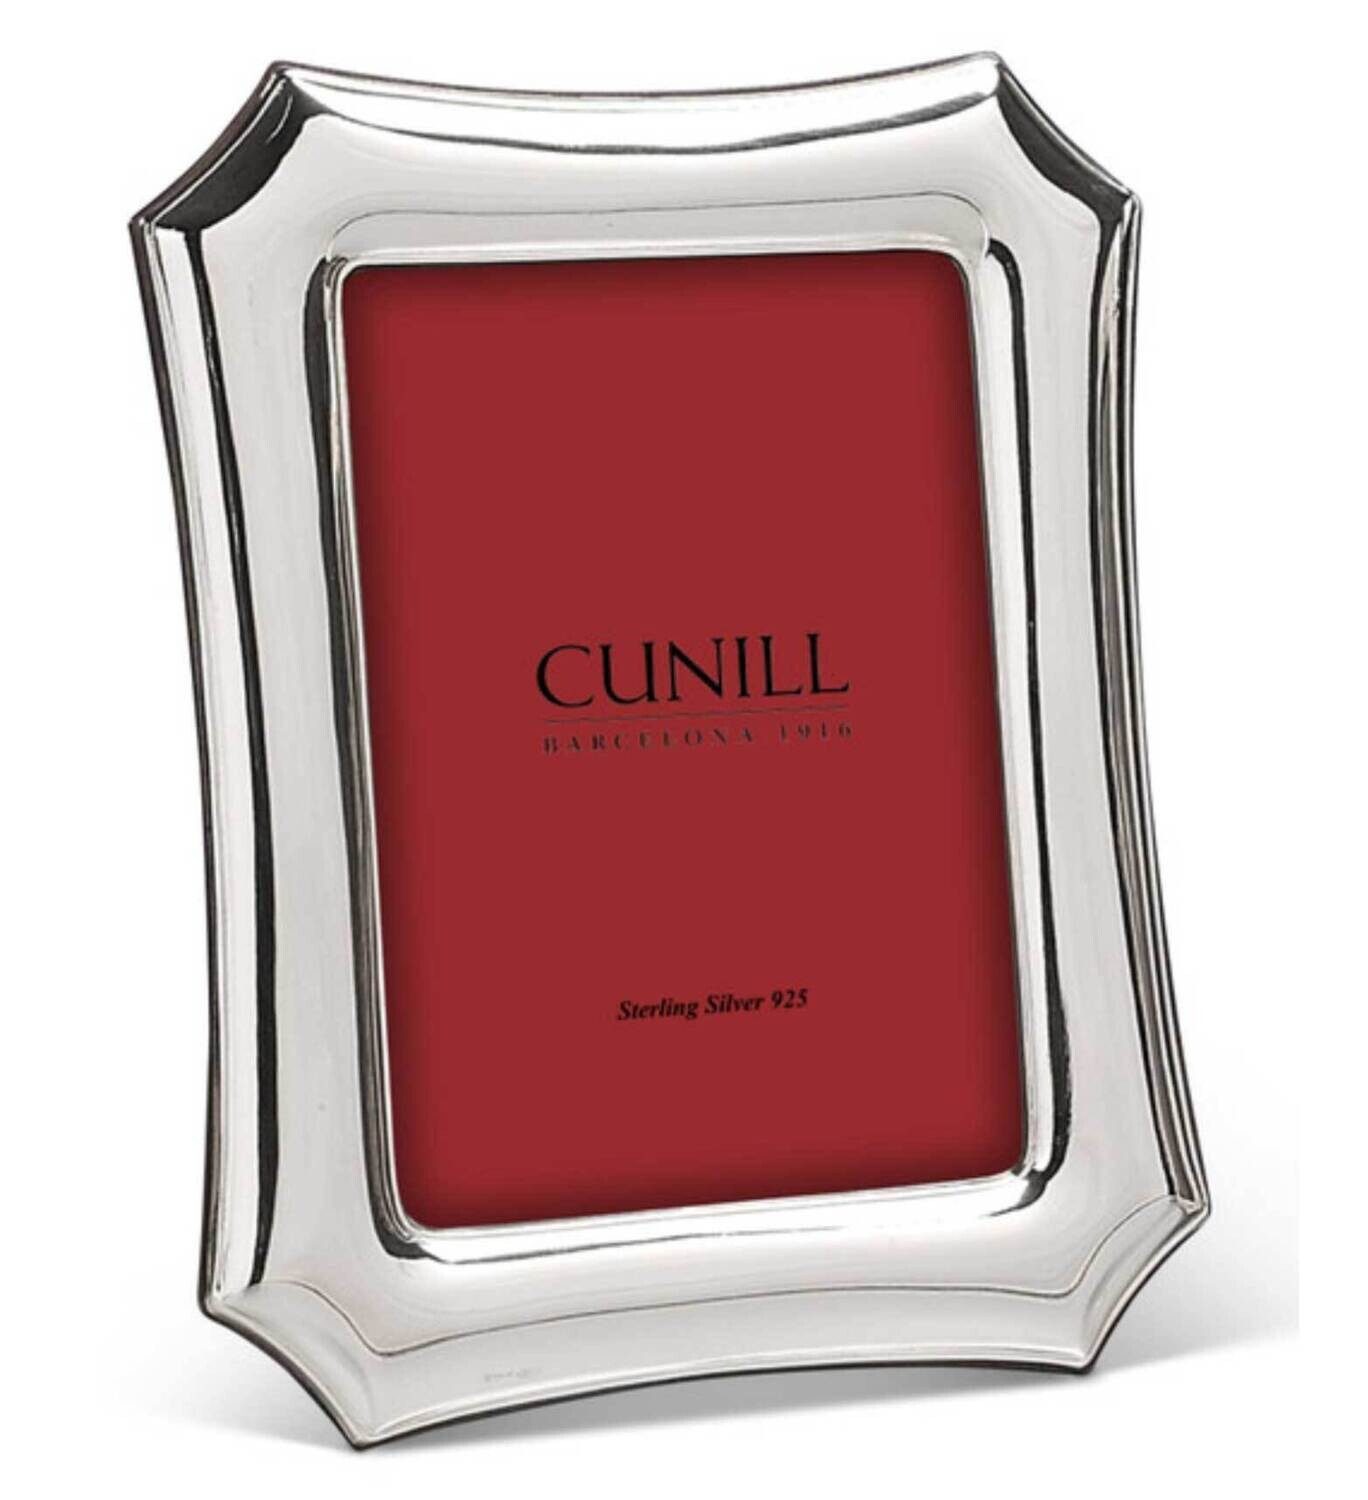 Cunill Gothic 8x10 Inch Picture Frame .925 Sterling Silver 91179